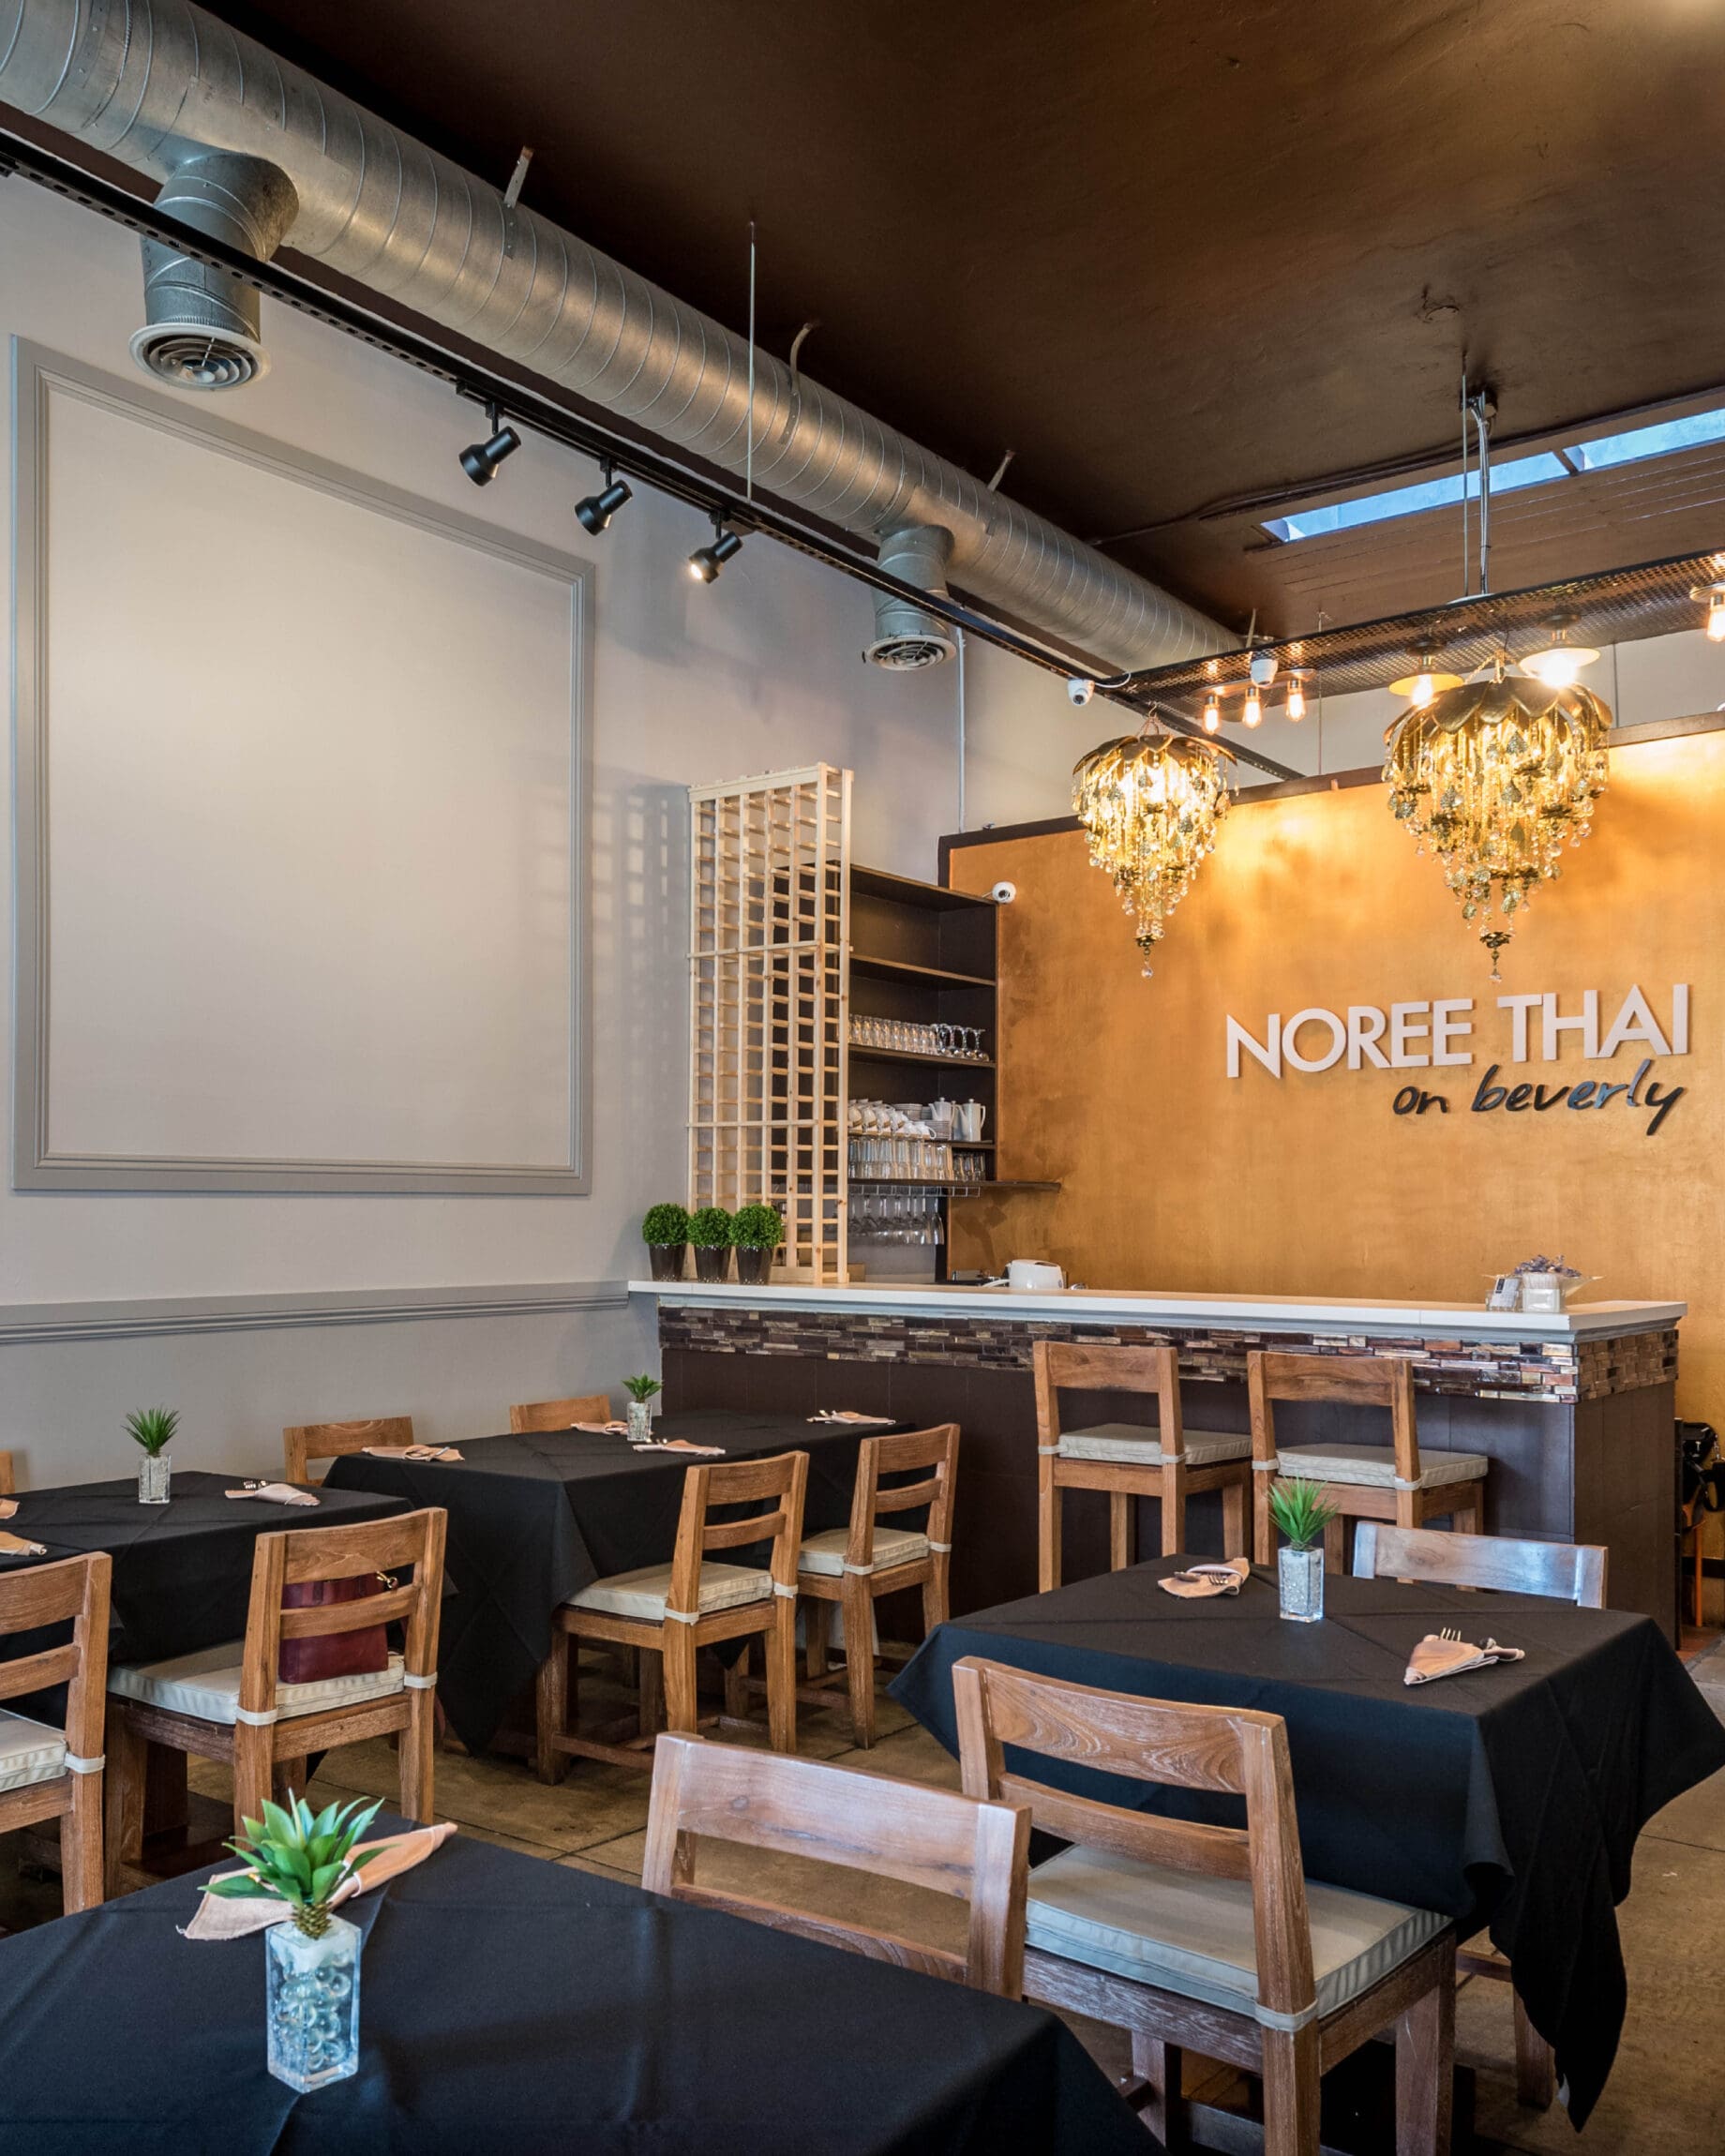 Interiors at Noree Thai in Los Angeles